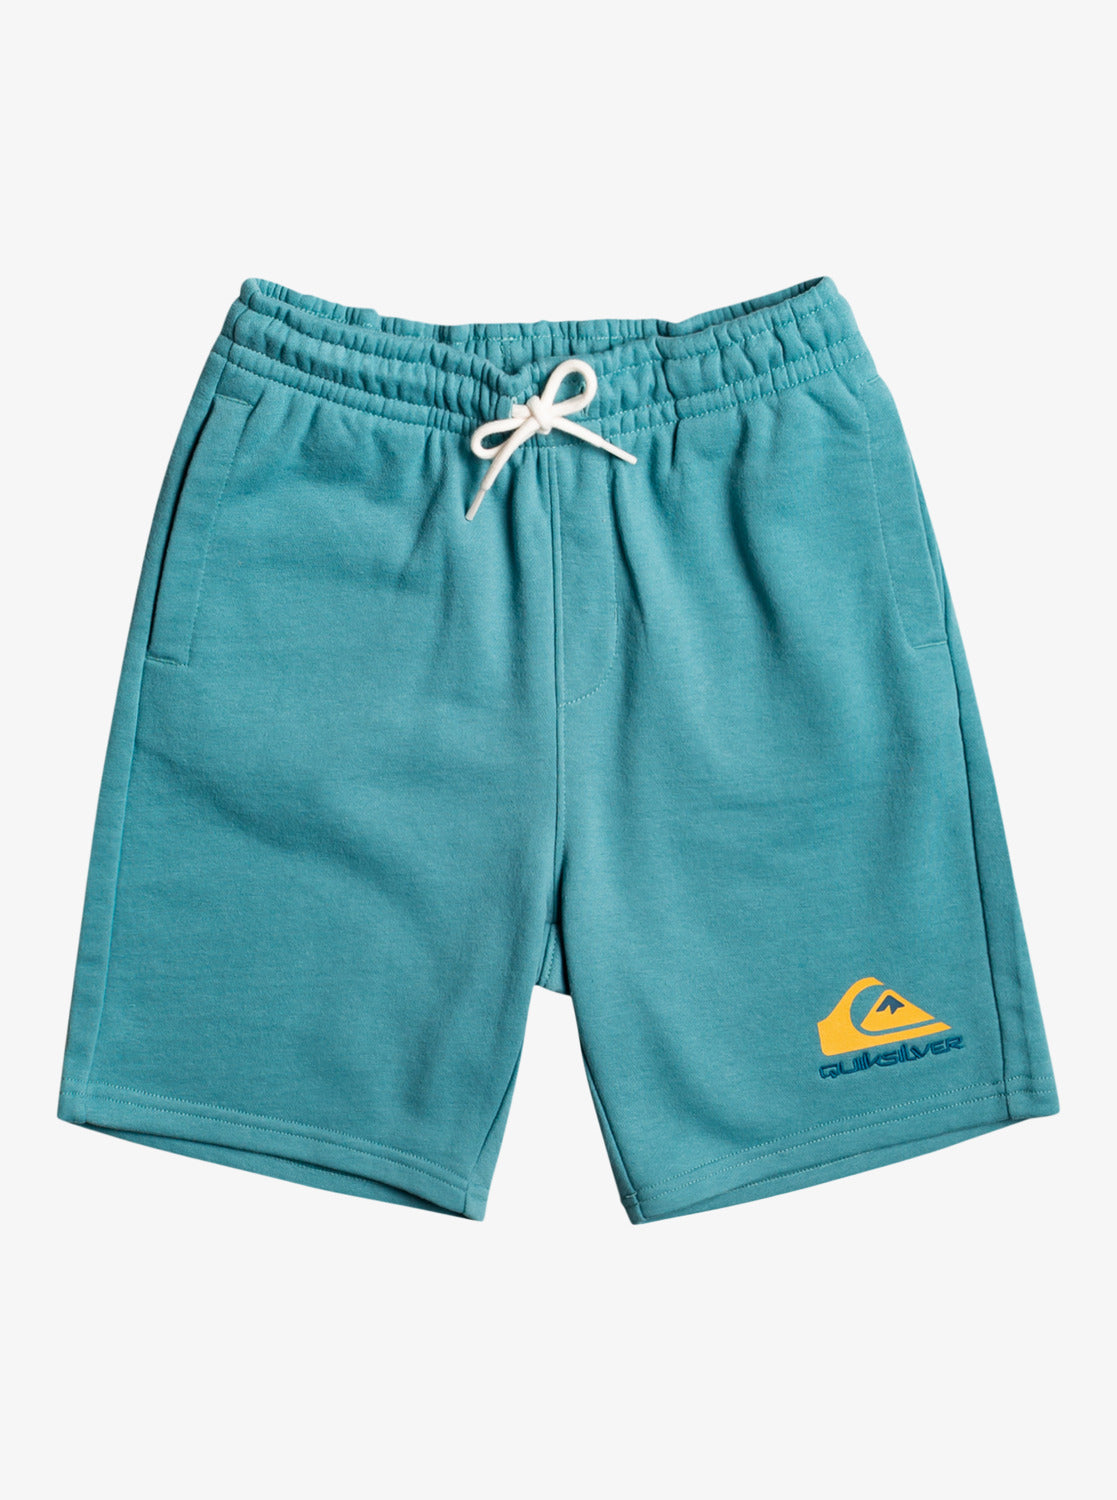 Quiksilver Easy Day Boys Sweat Shorts in Brittany Boy